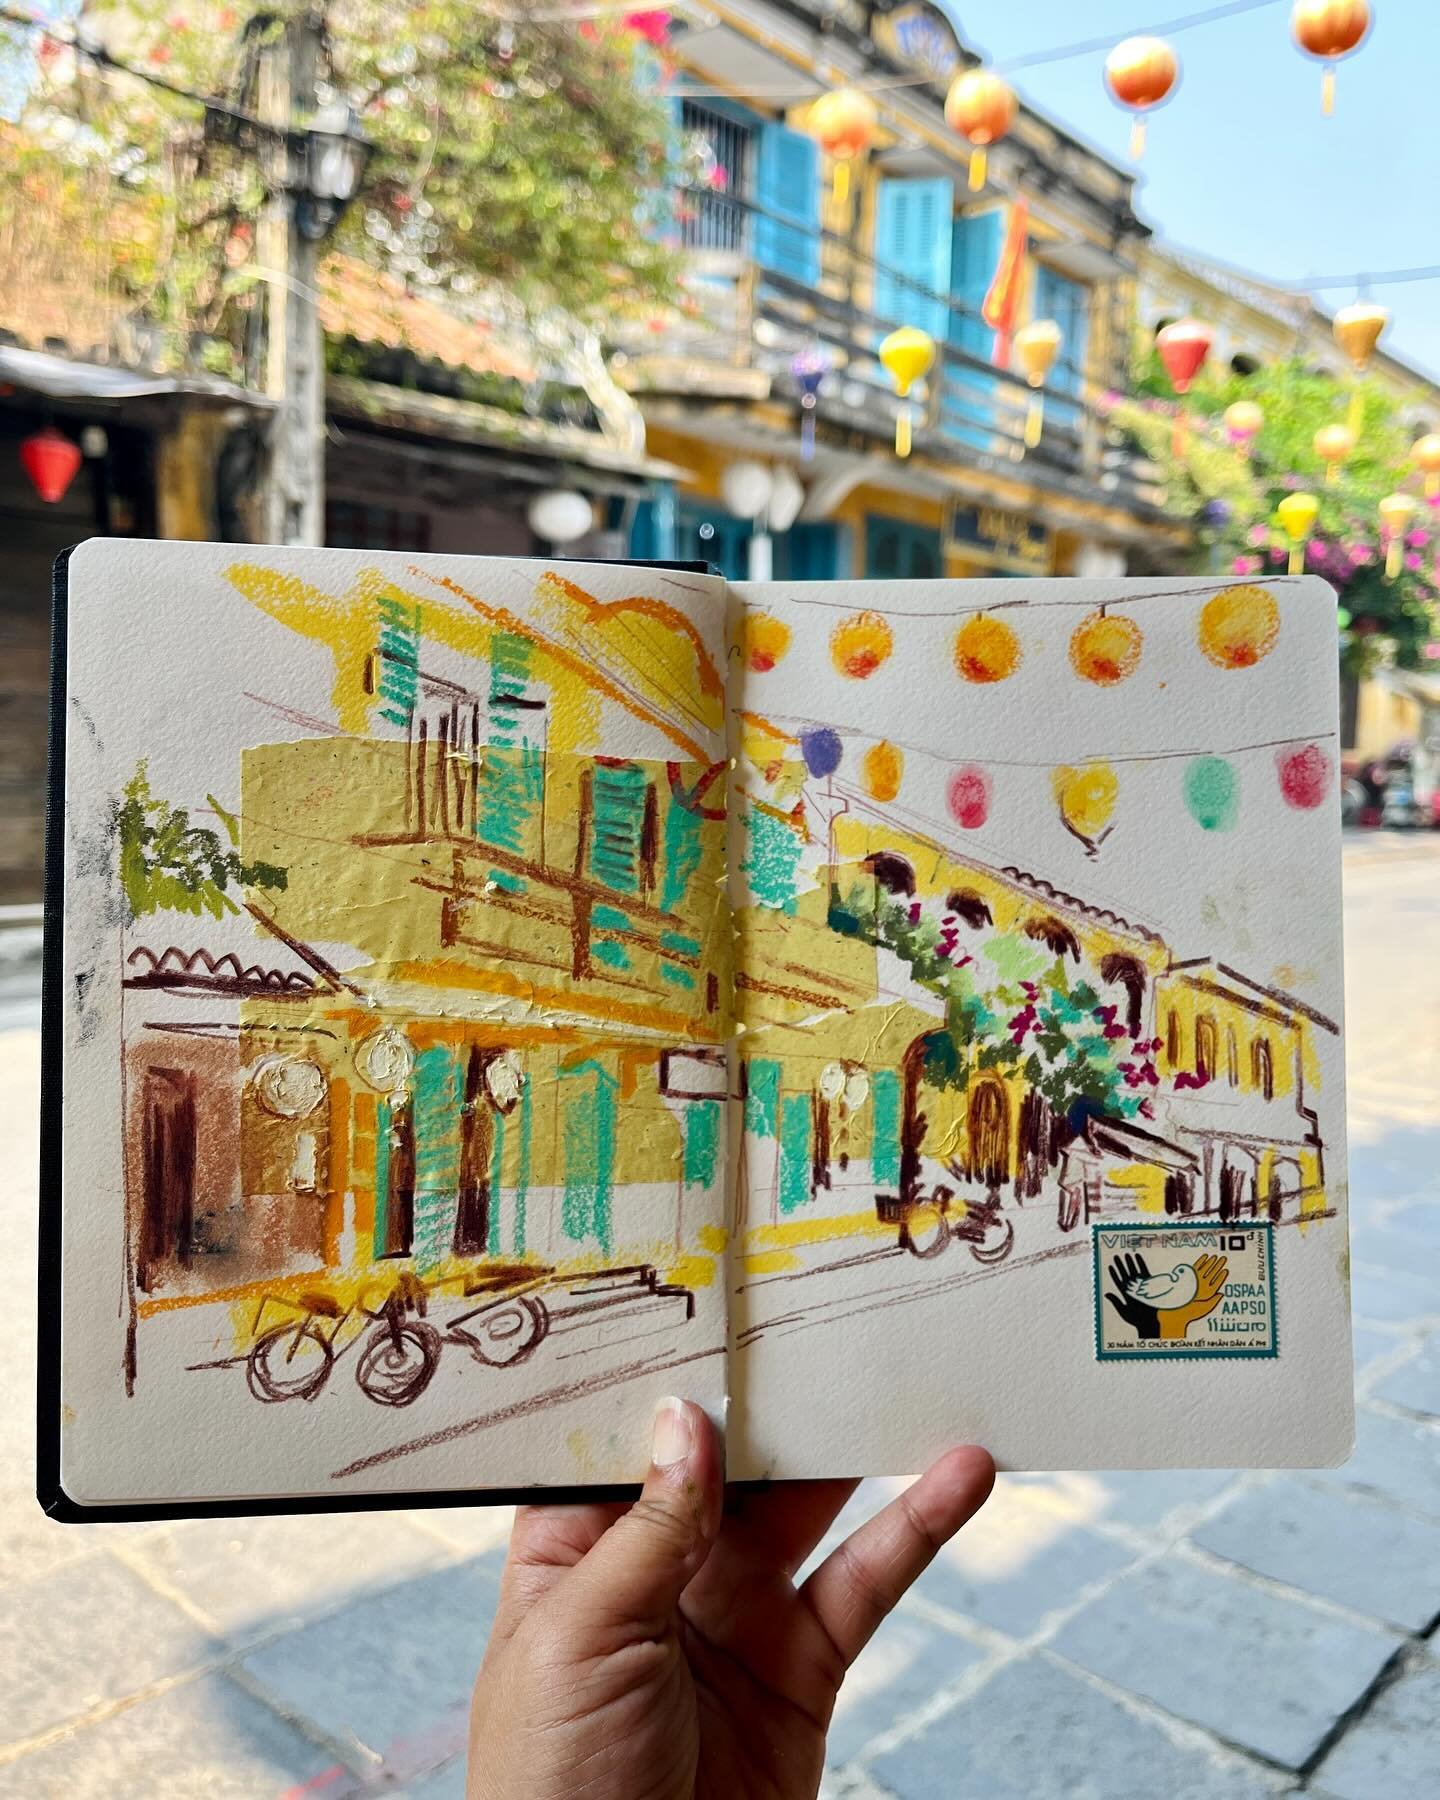 These were from a day in Old Town Hoi An with @annasartfoodculture 🌅A beautiful early dawn start meant the streets were quieter without the bustle of traders and tourists. We settled in little red chairs with coffee and bahn mi 🥖My first version in